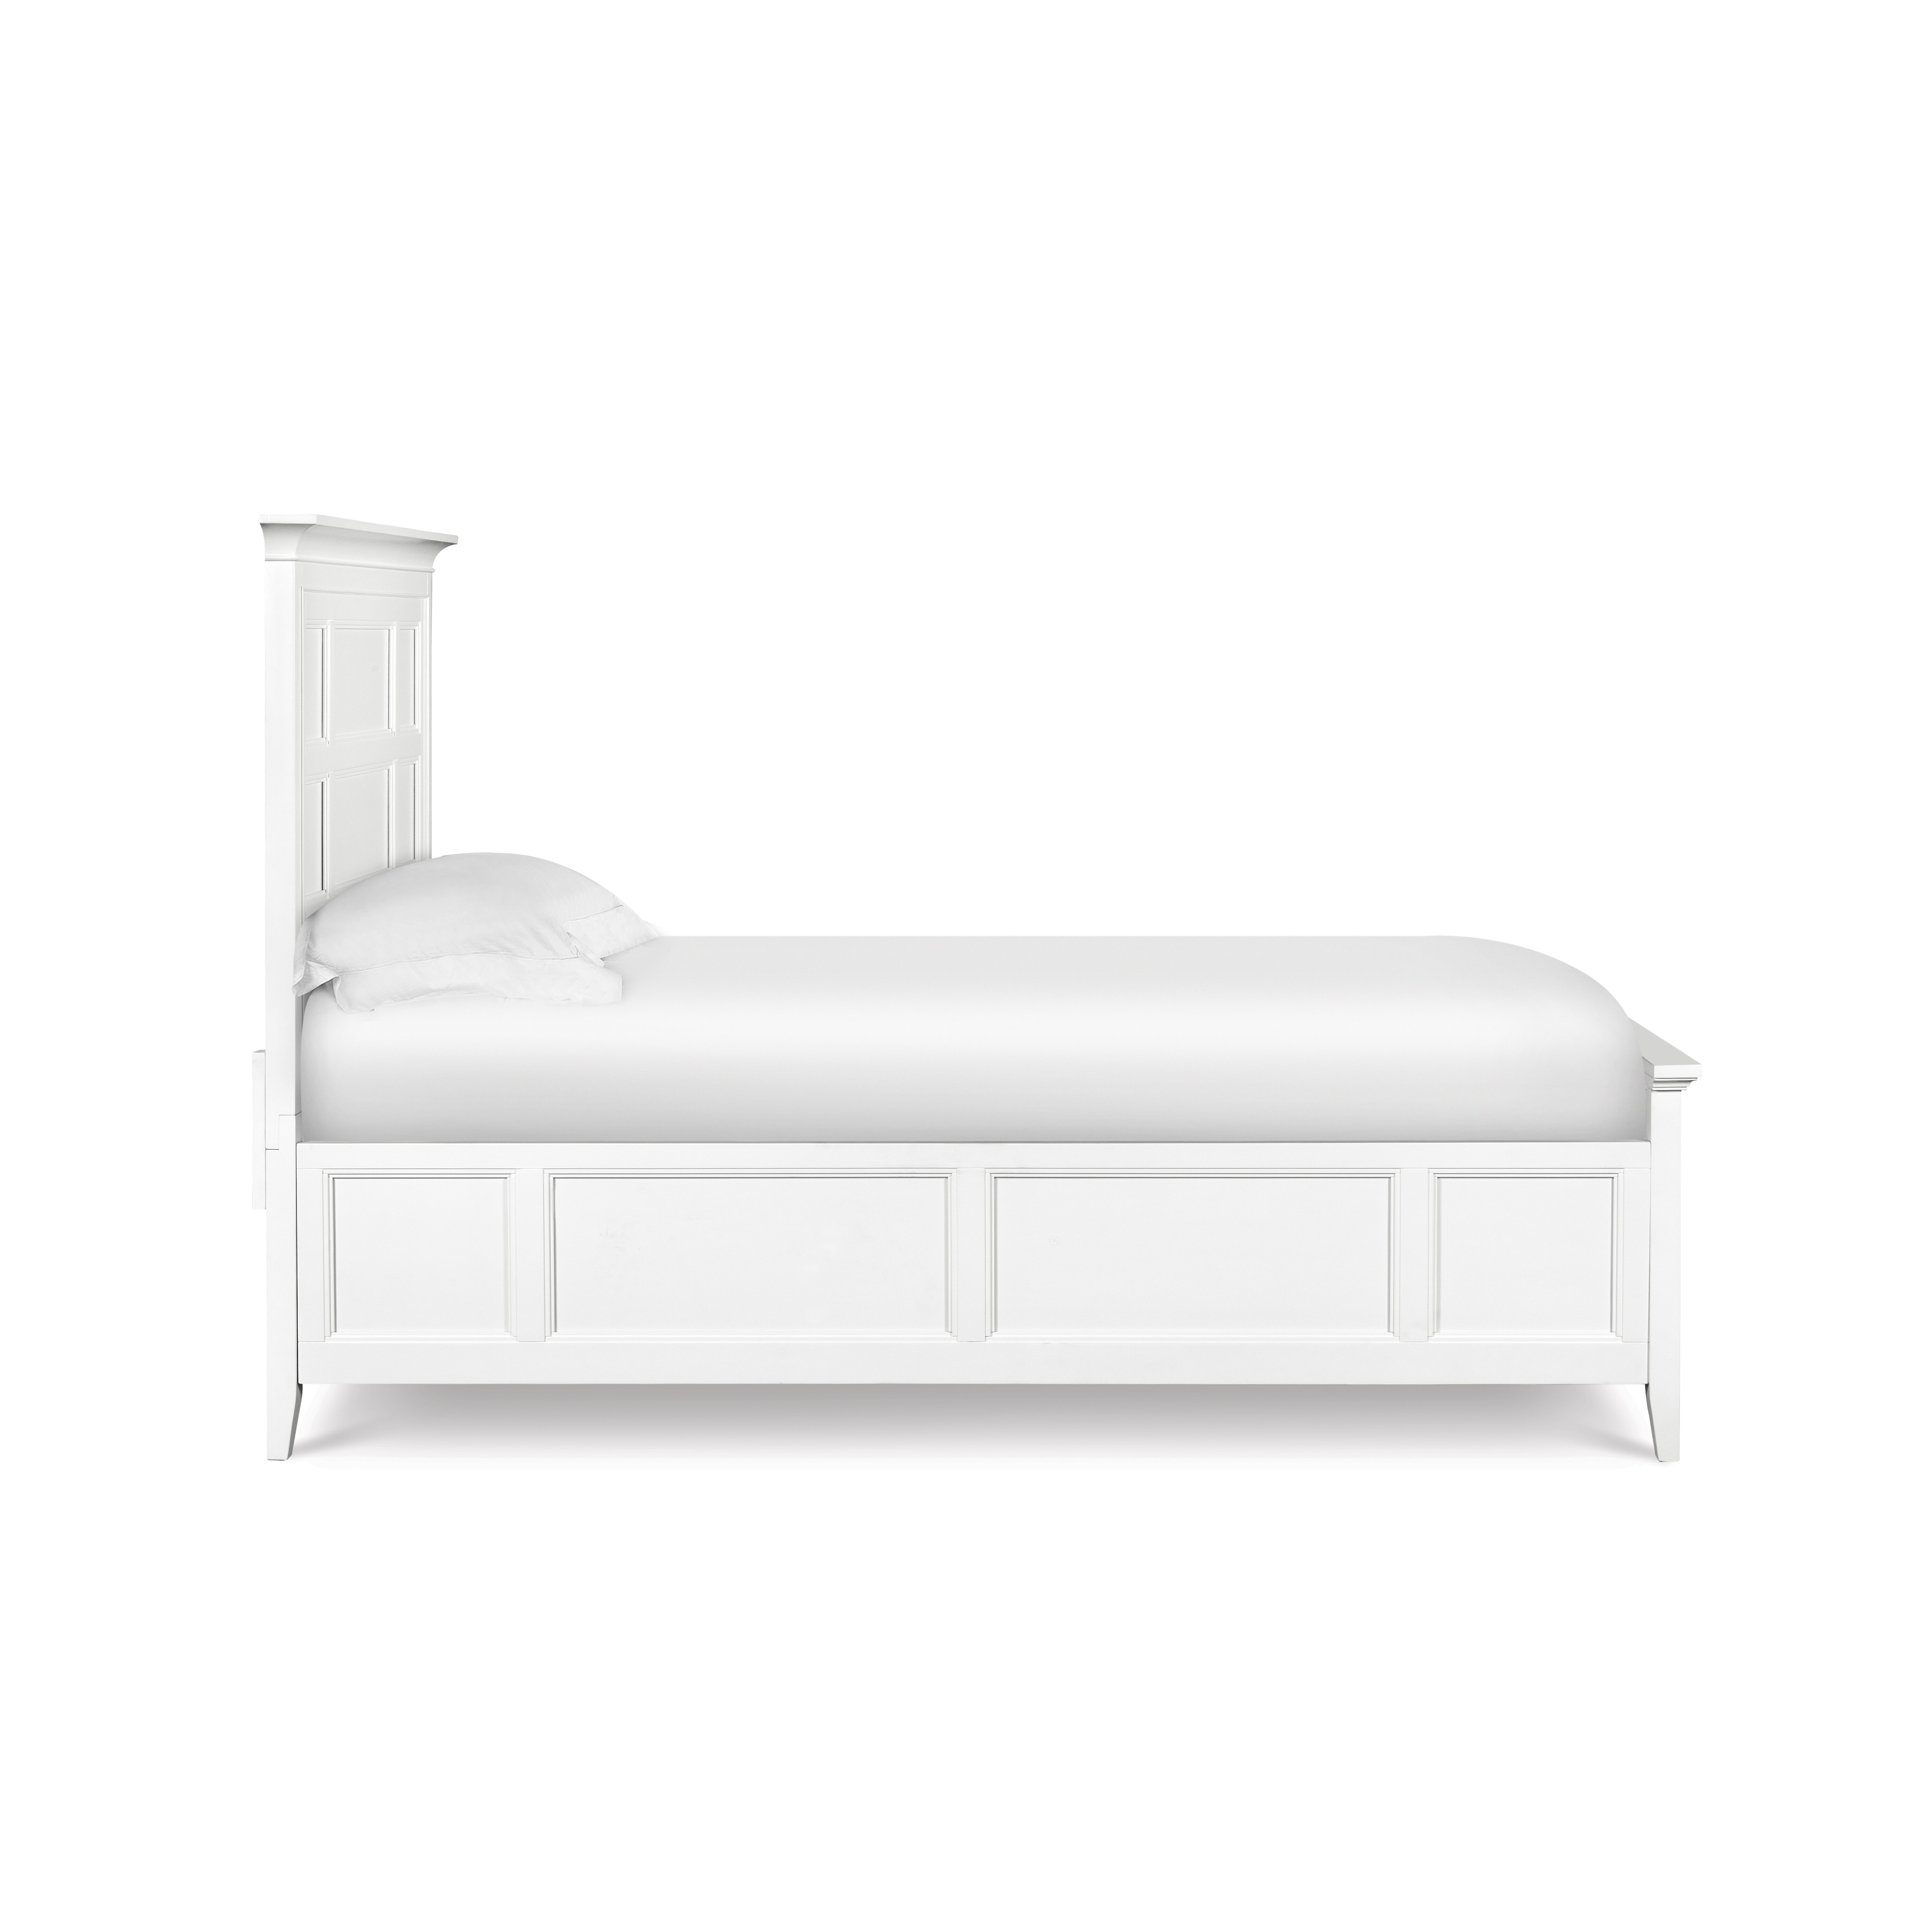 replacement twin bed rails for sale wooden